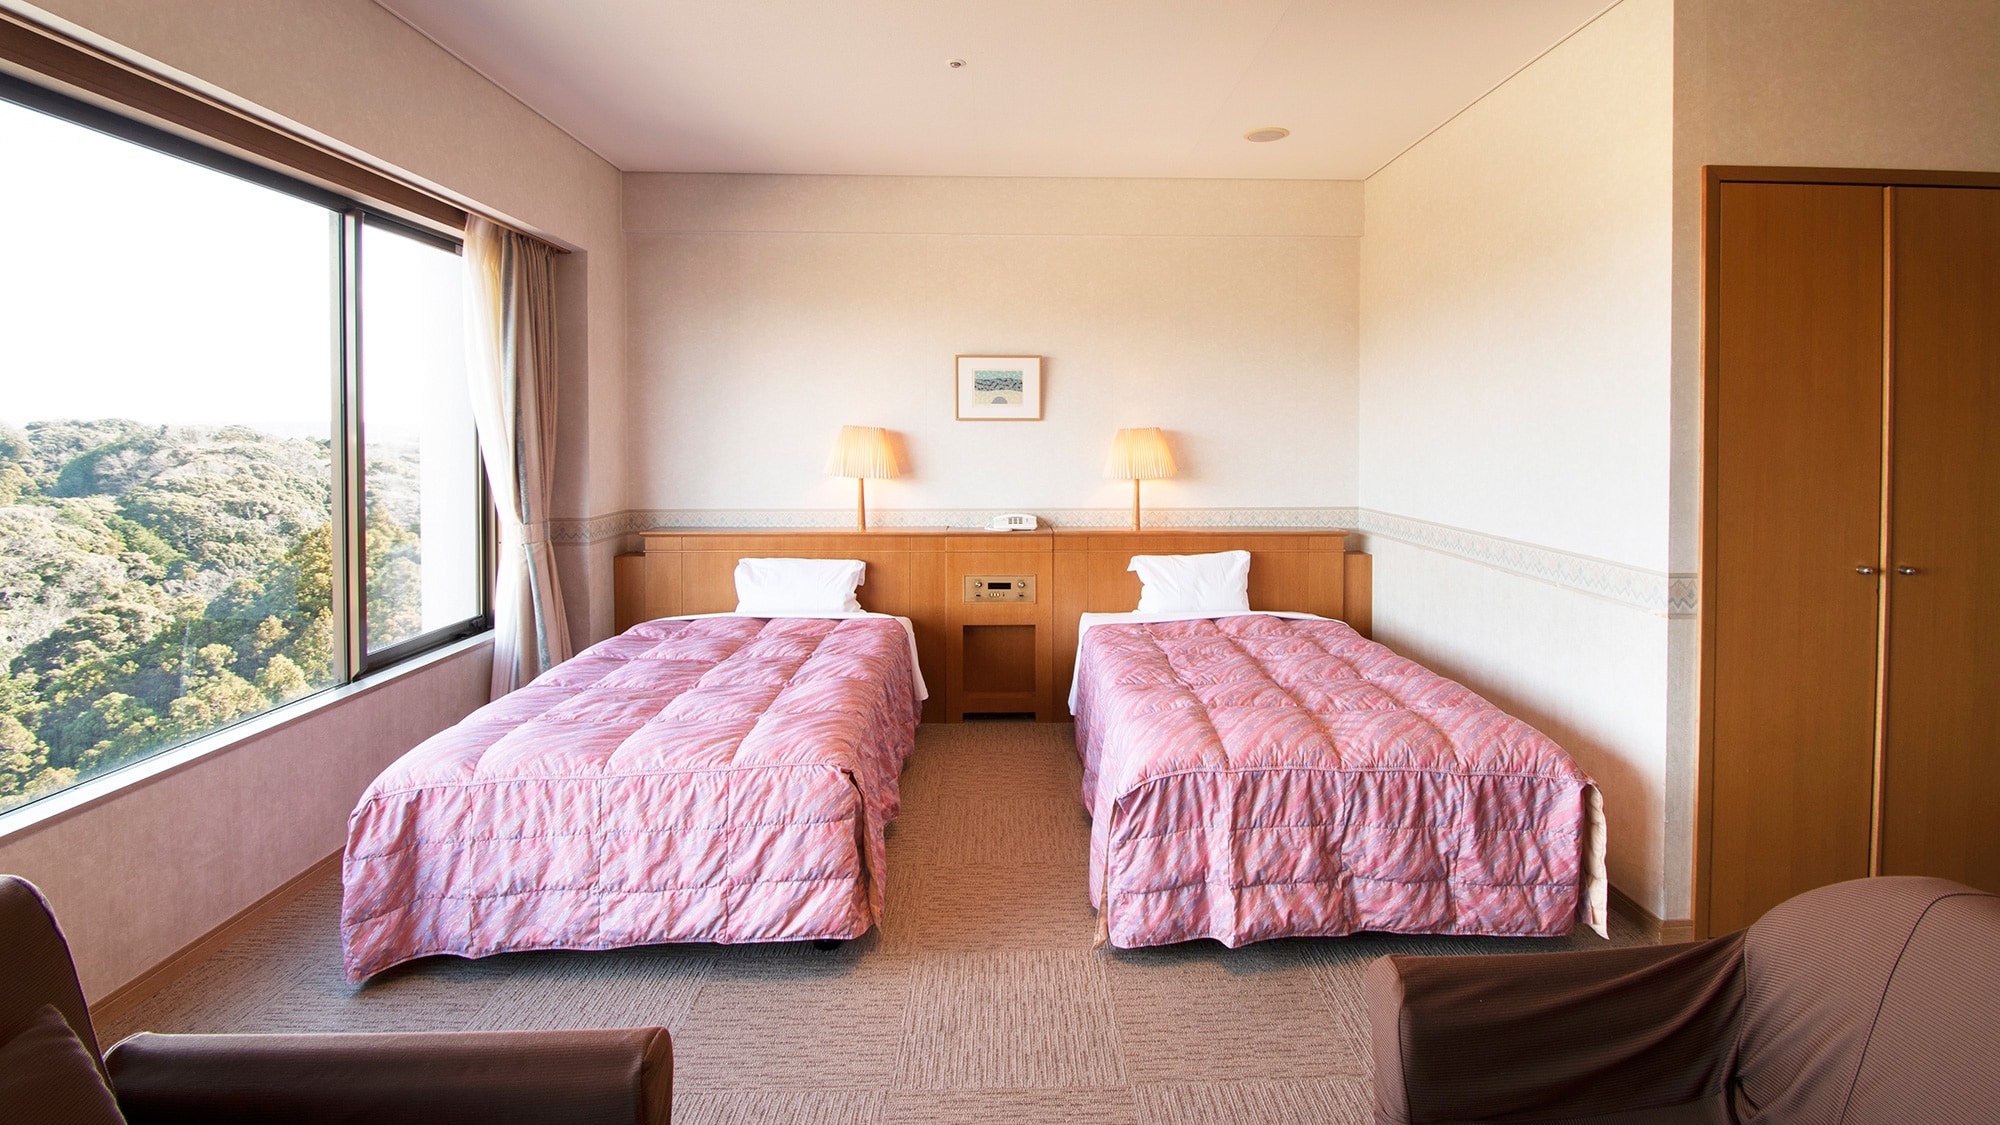 ◆ Deluxe Room [North Wing] 52.3 ตร.ม.